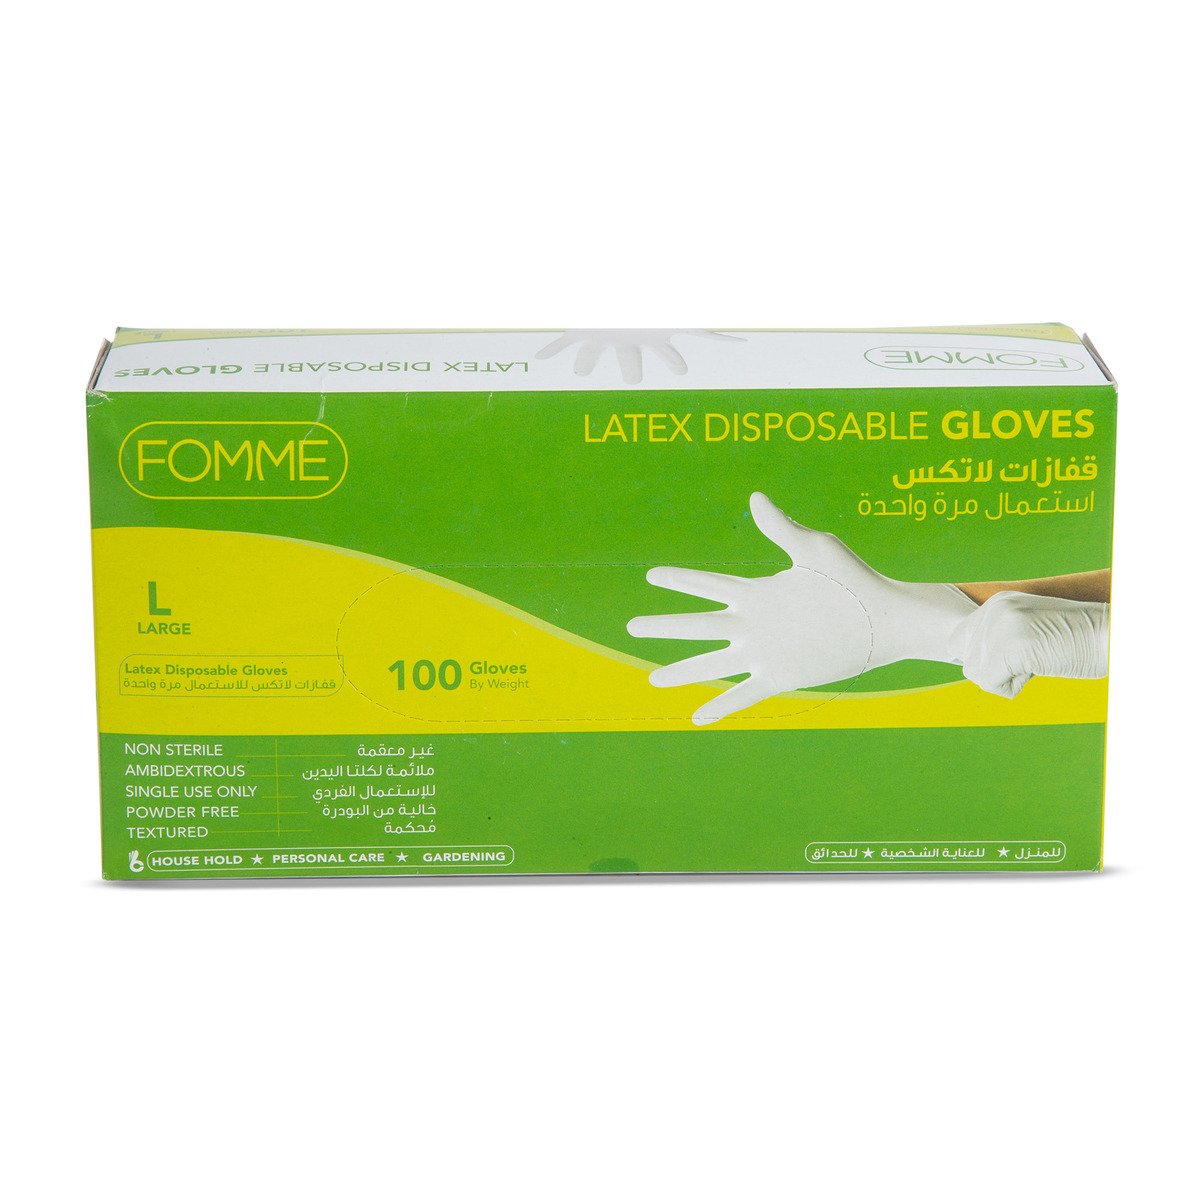 Fomme Latex Disposable Gloves Large 100pcs